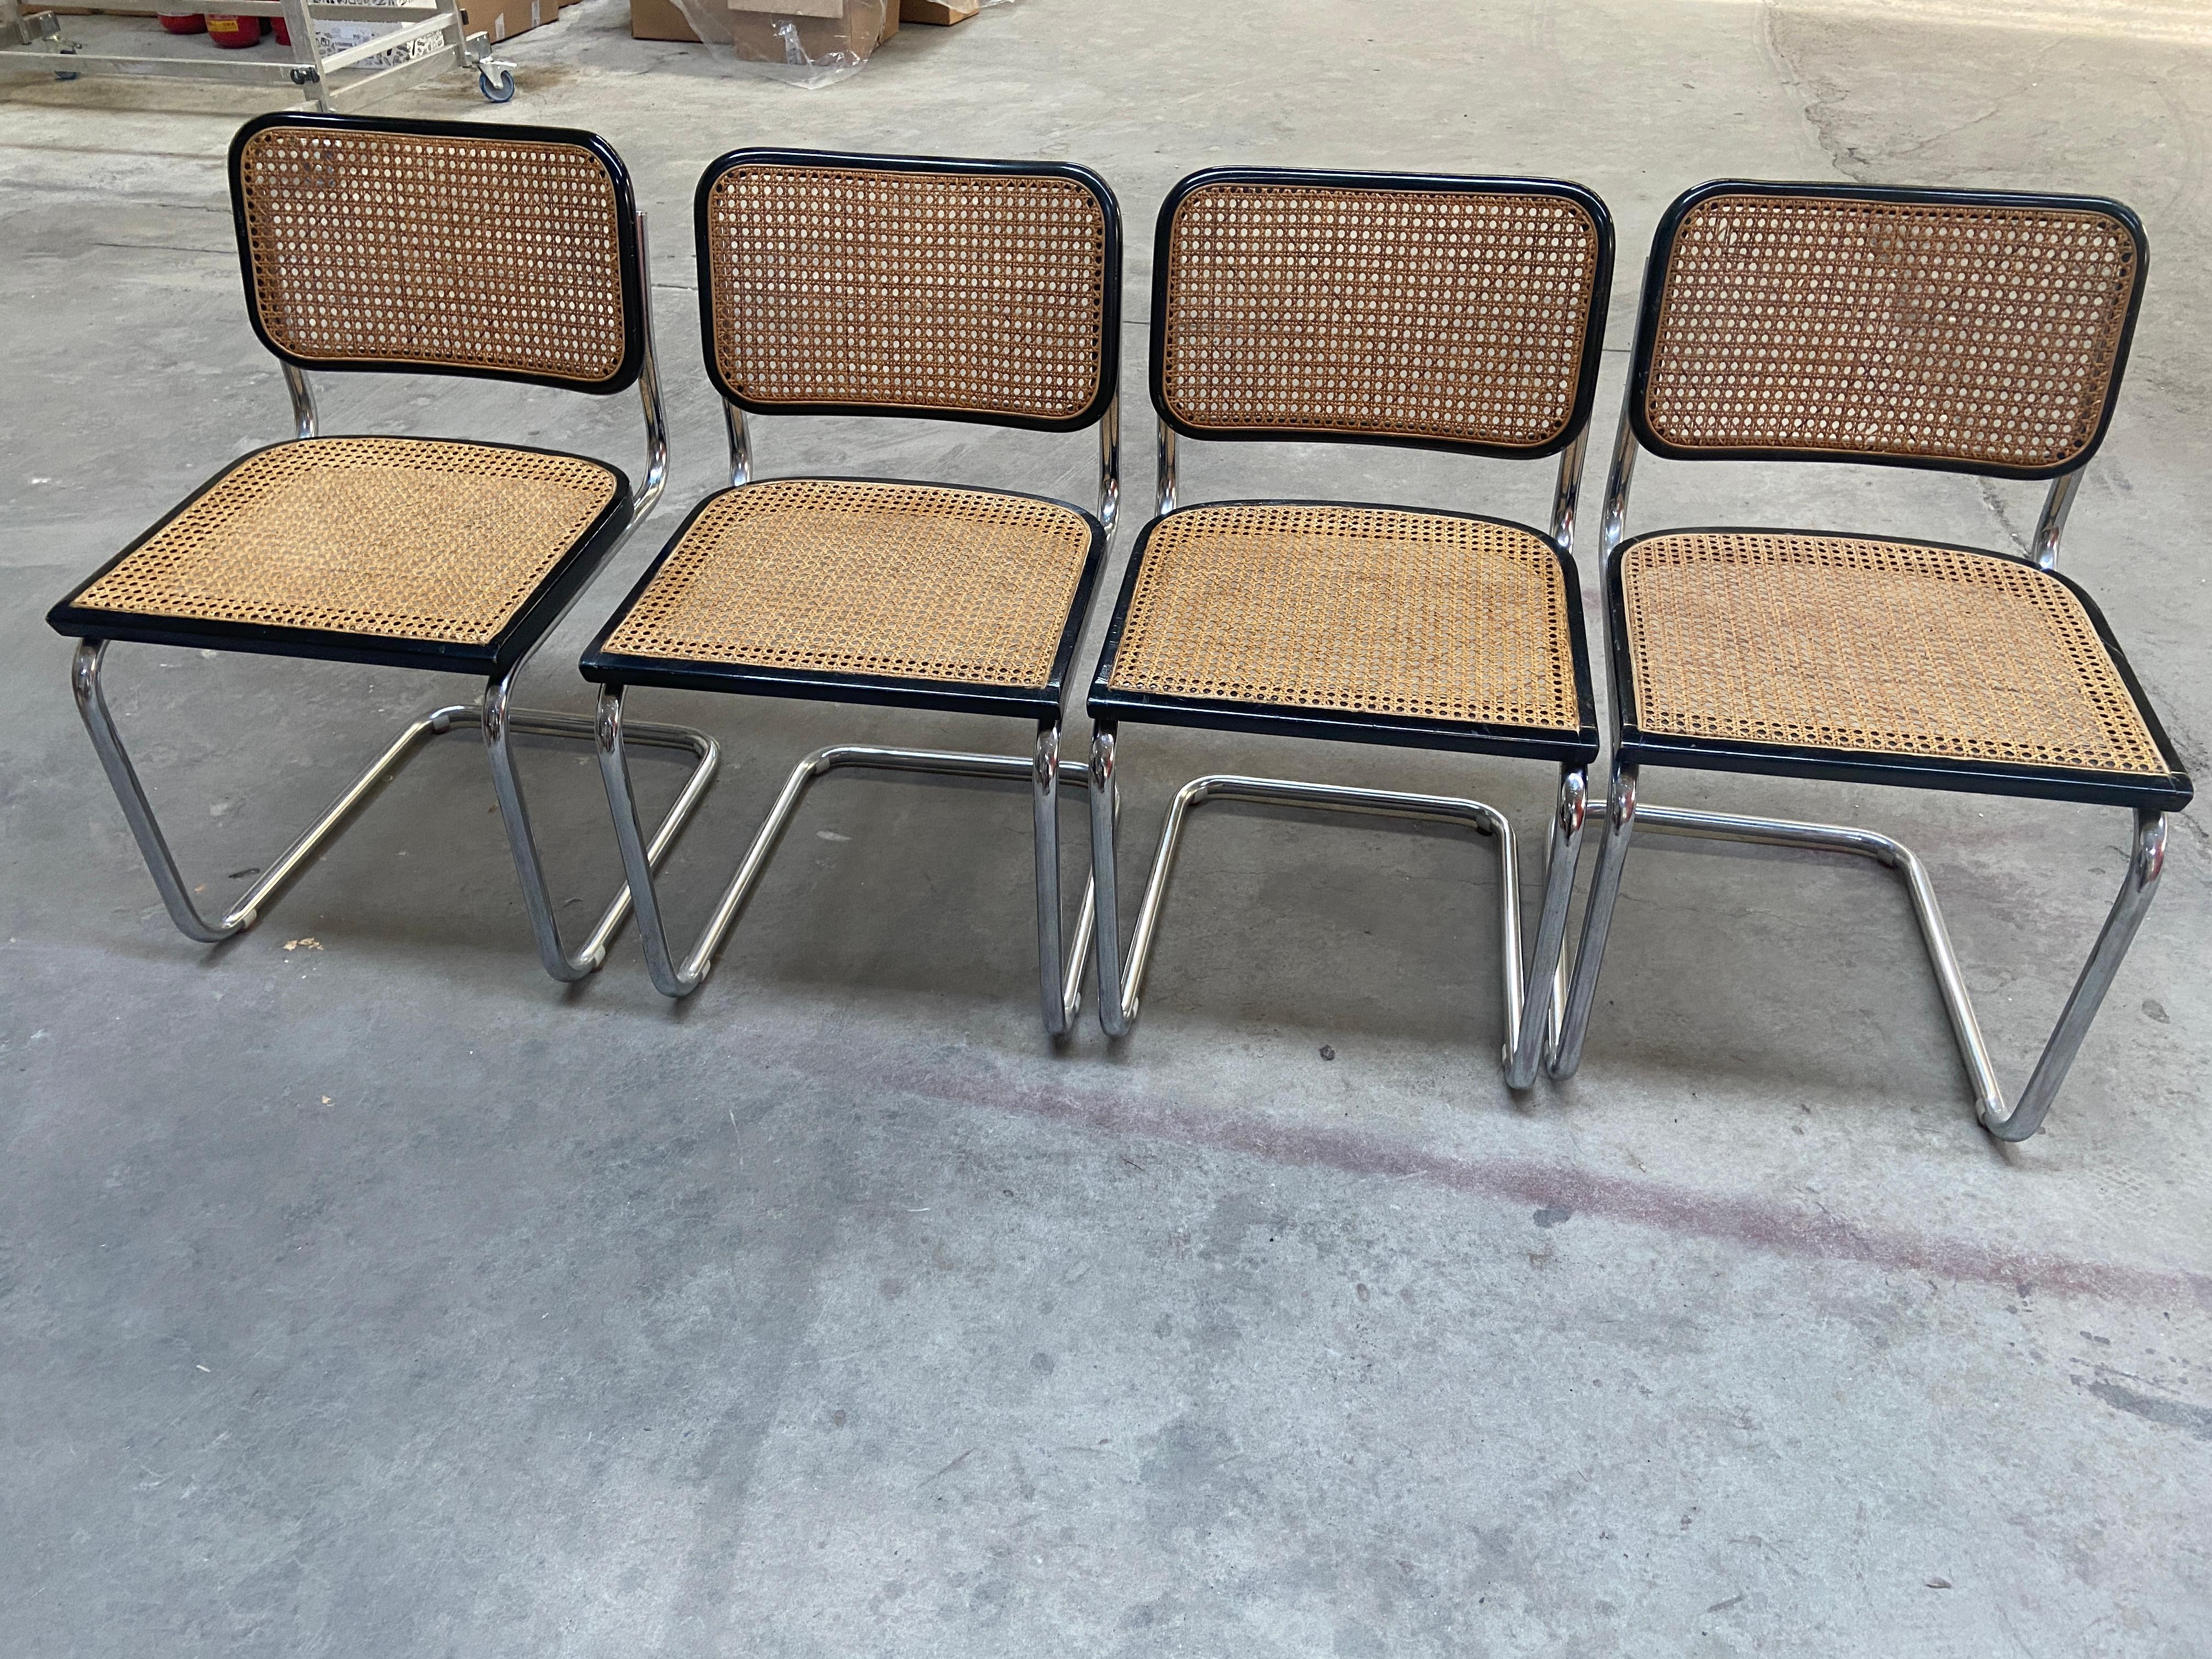 Late 20th Century Mid-Century Modern Italian set of 4 Cesca Chairs by Marcel Breuer. 1970s